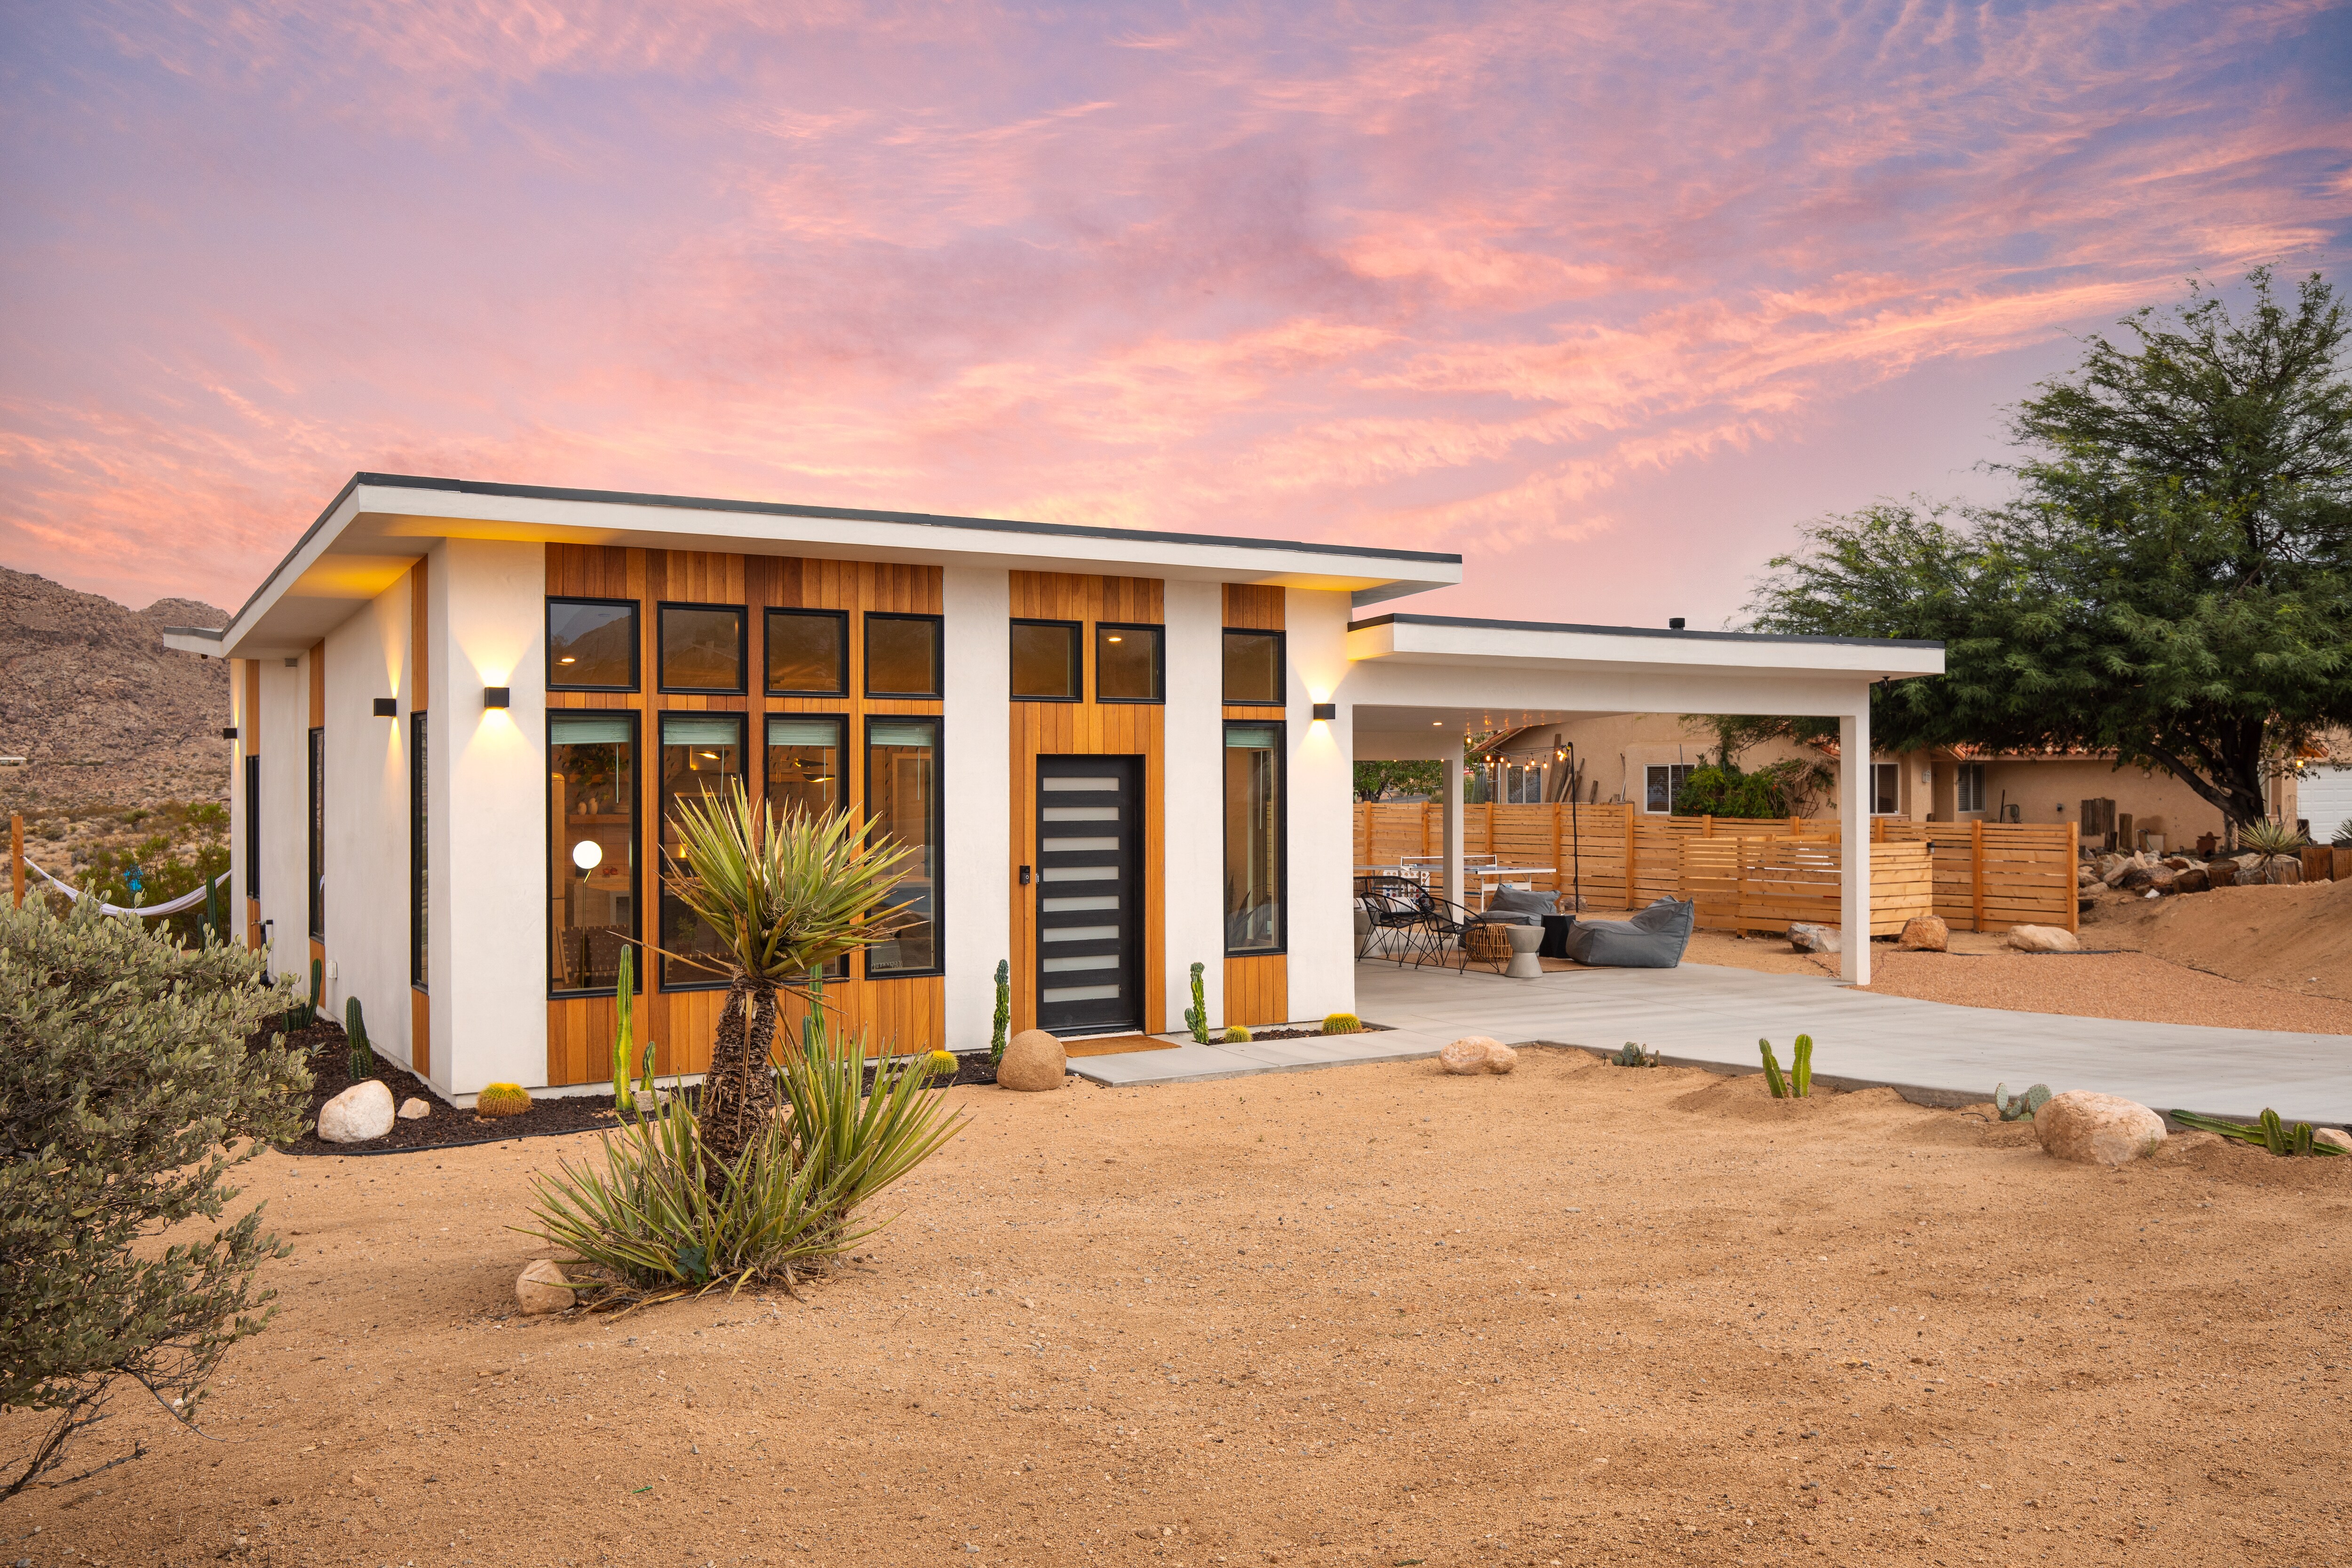 Your dream Joshua Tree oasis features a hot tub, hammocks, and so much more.